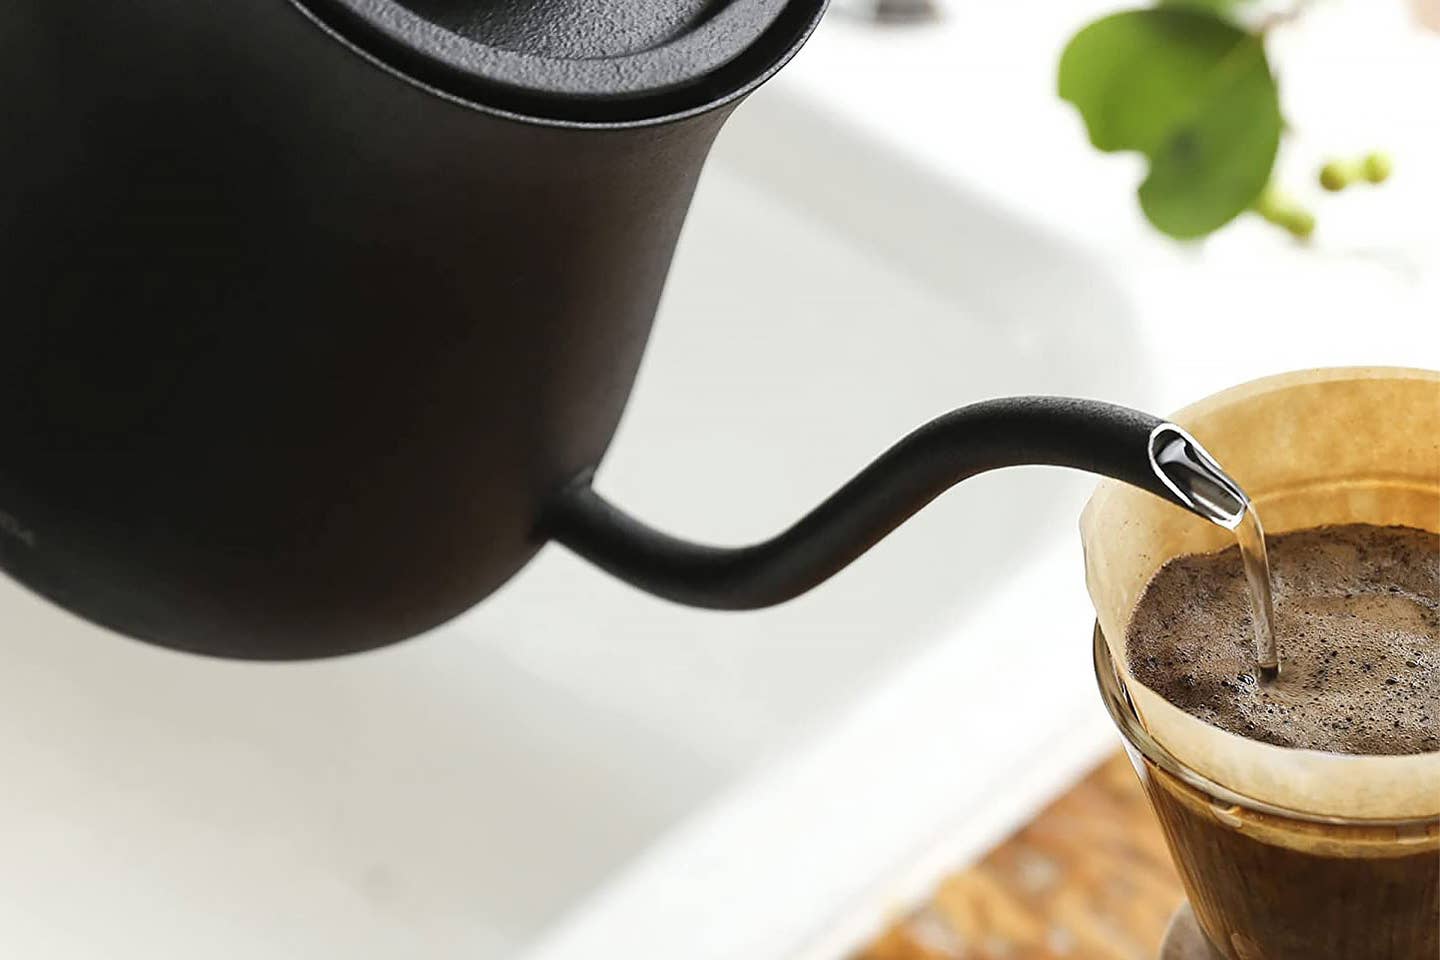 Best Gooseneck Kettle for Pour Over Coffee